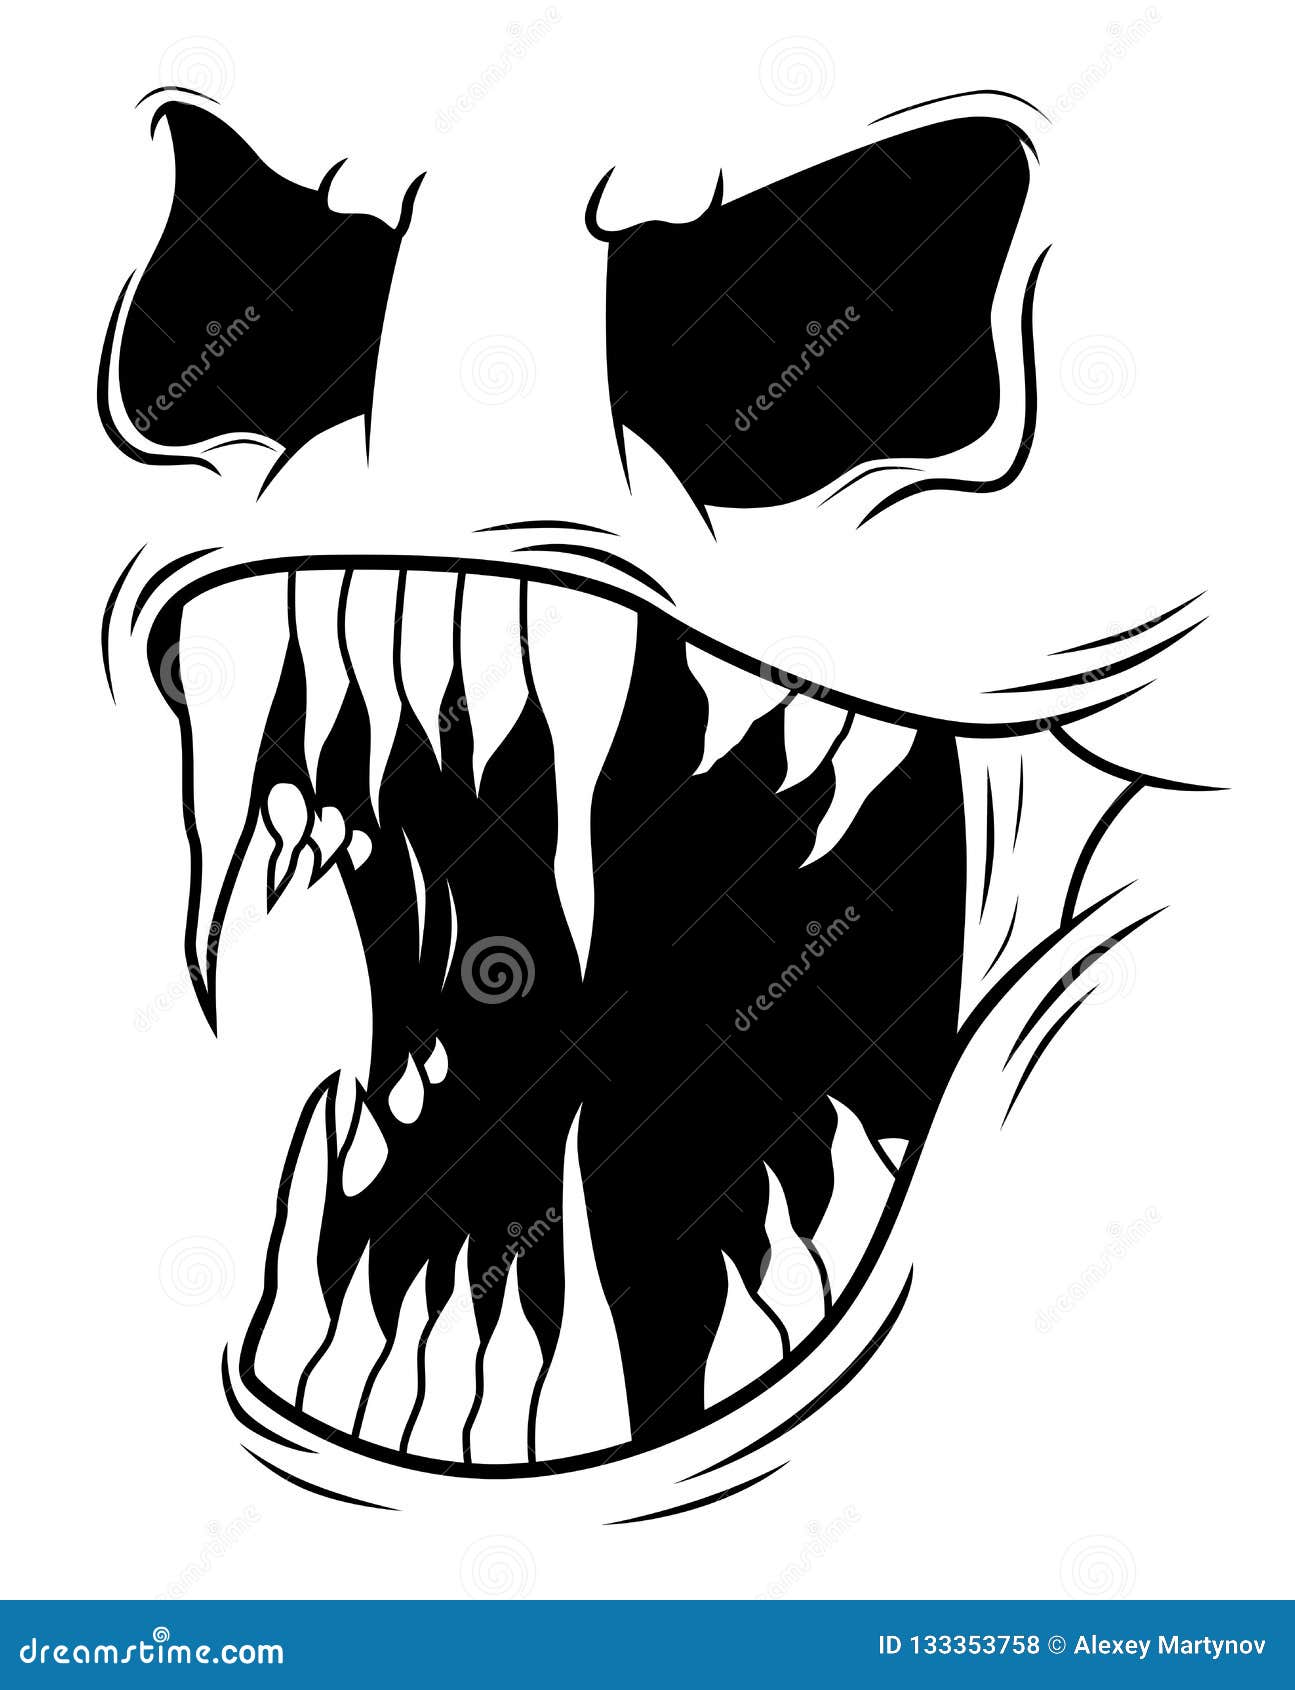 Cute Scary Drawings 45 Photos  WONDER DAY  Coloring pages for children  and adults